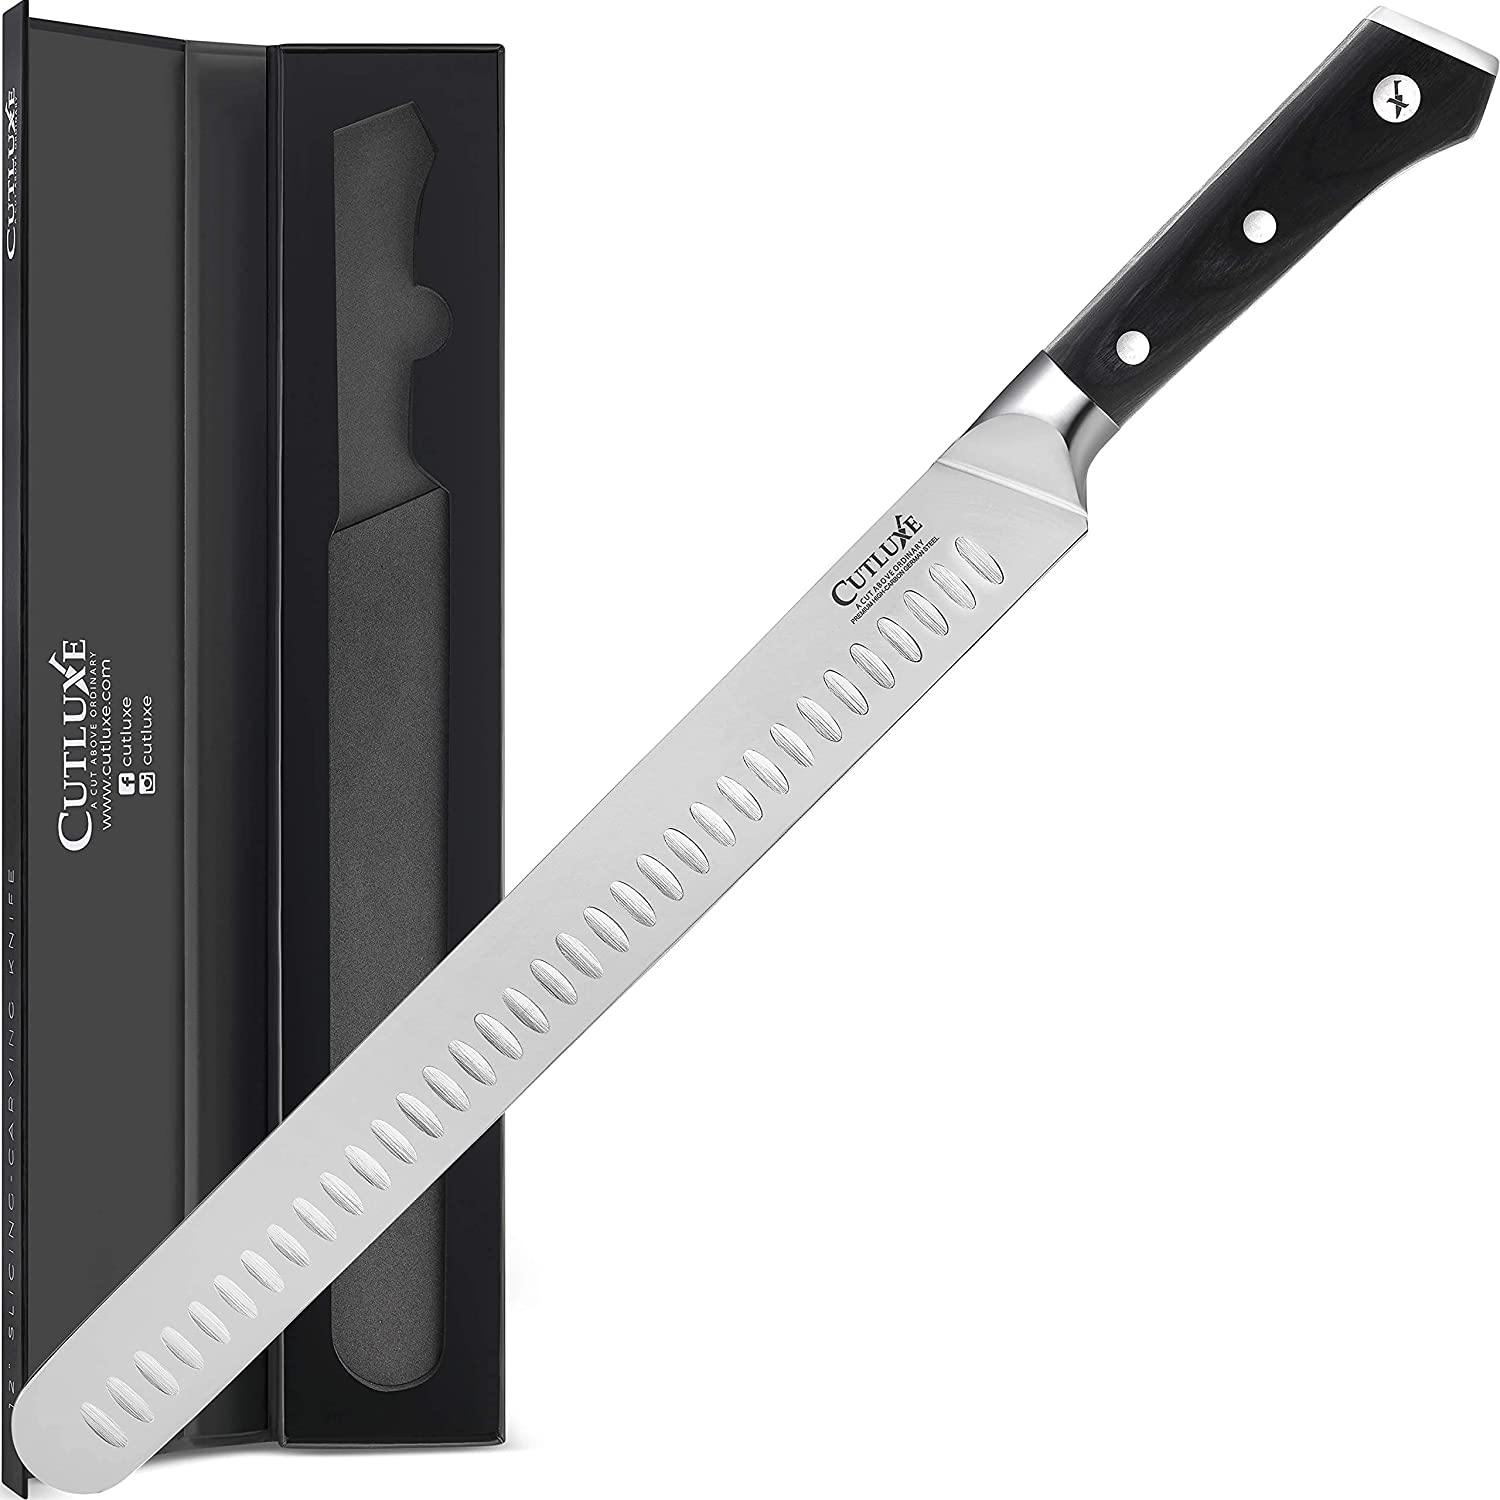 Cutluxe Slicing Carving Knife